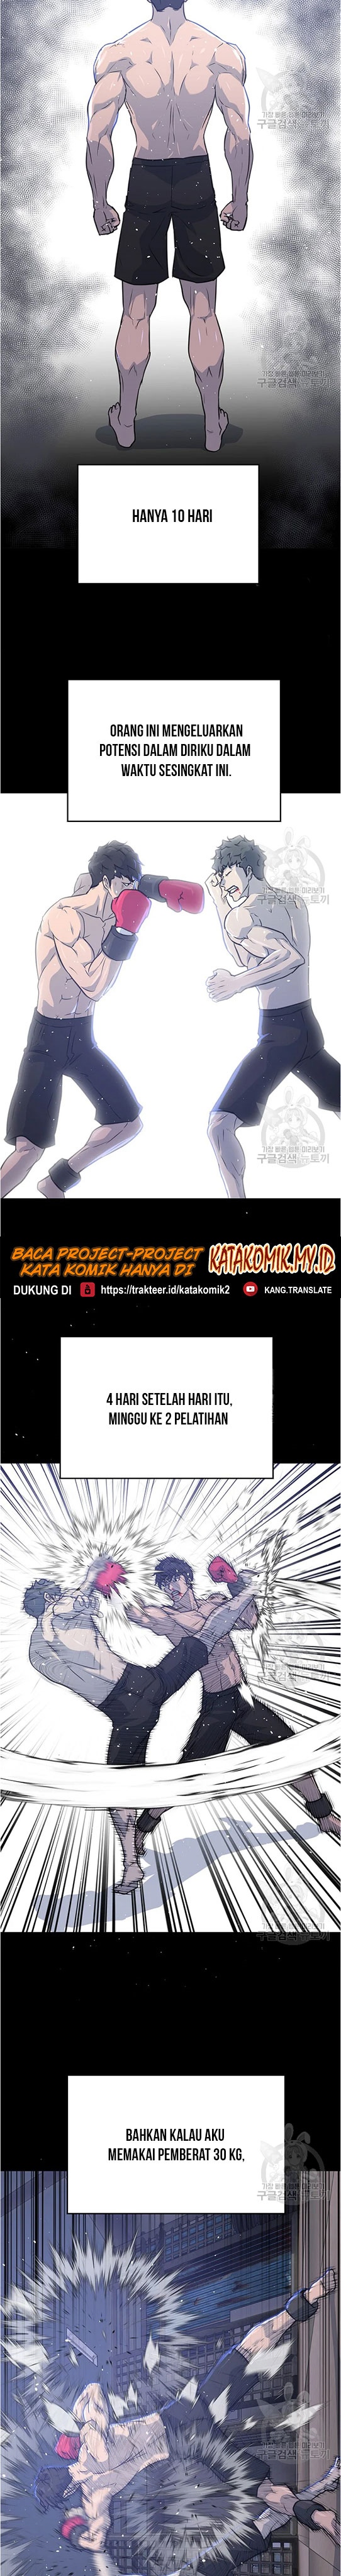 Trigger Chapter 96